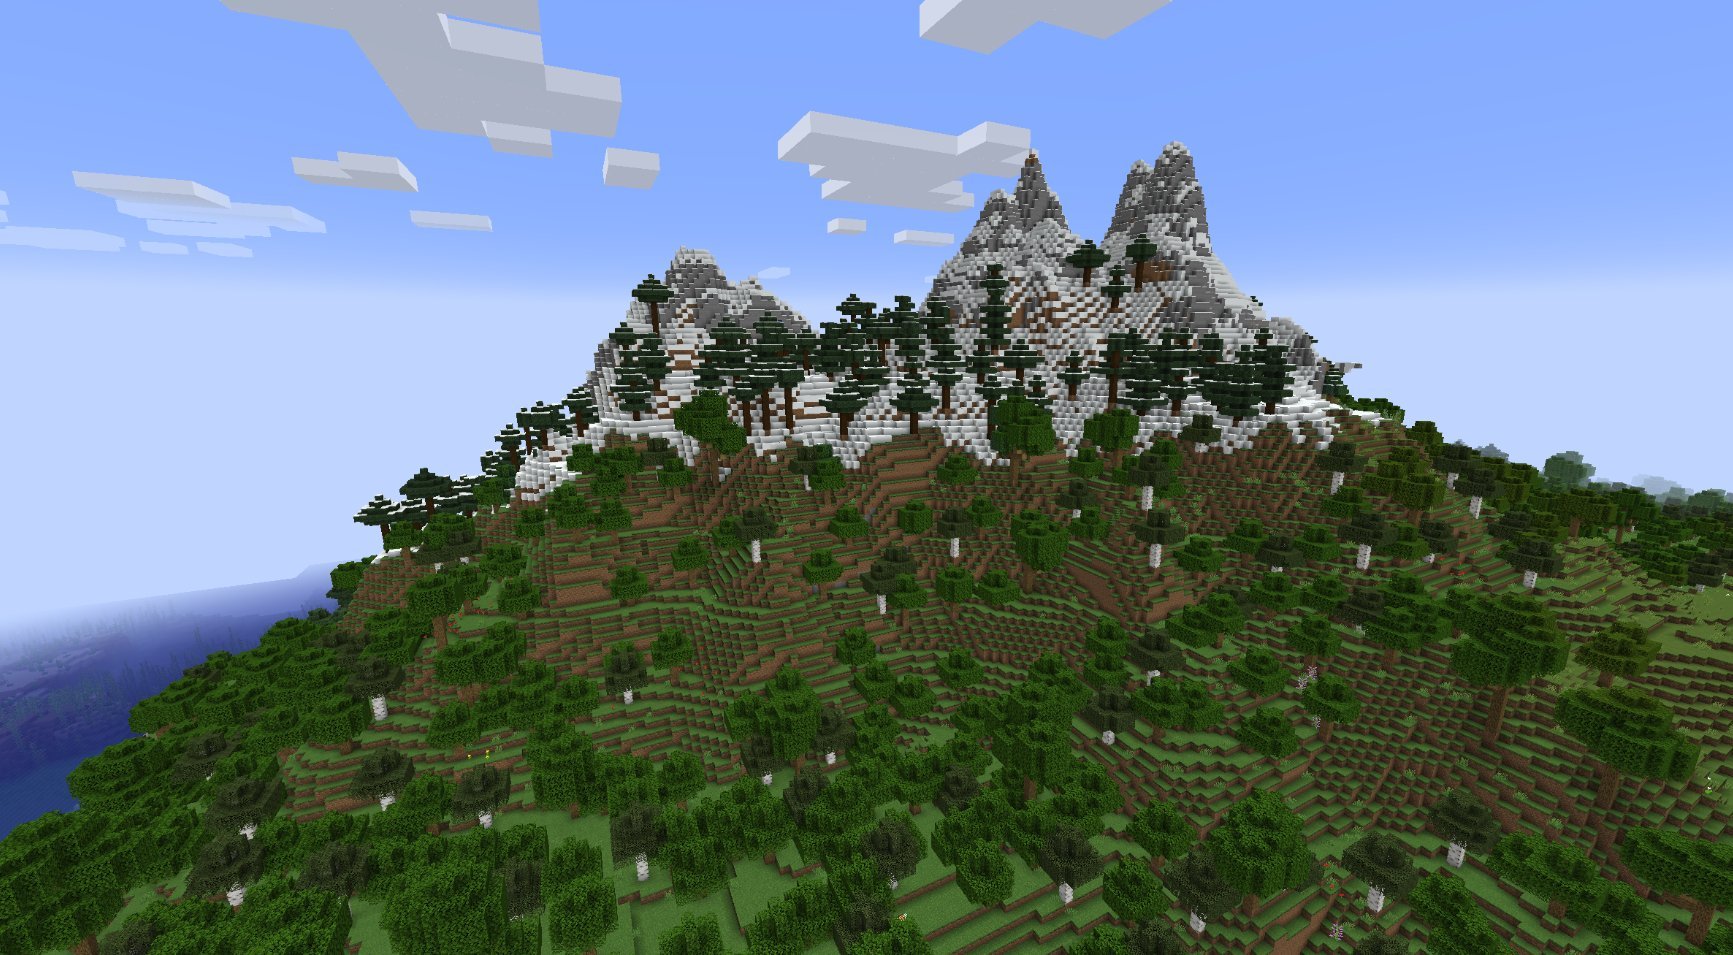 minecraft-caves-and-cliffs-update-1.18-experimental-snapshot-5-image-01.jpg